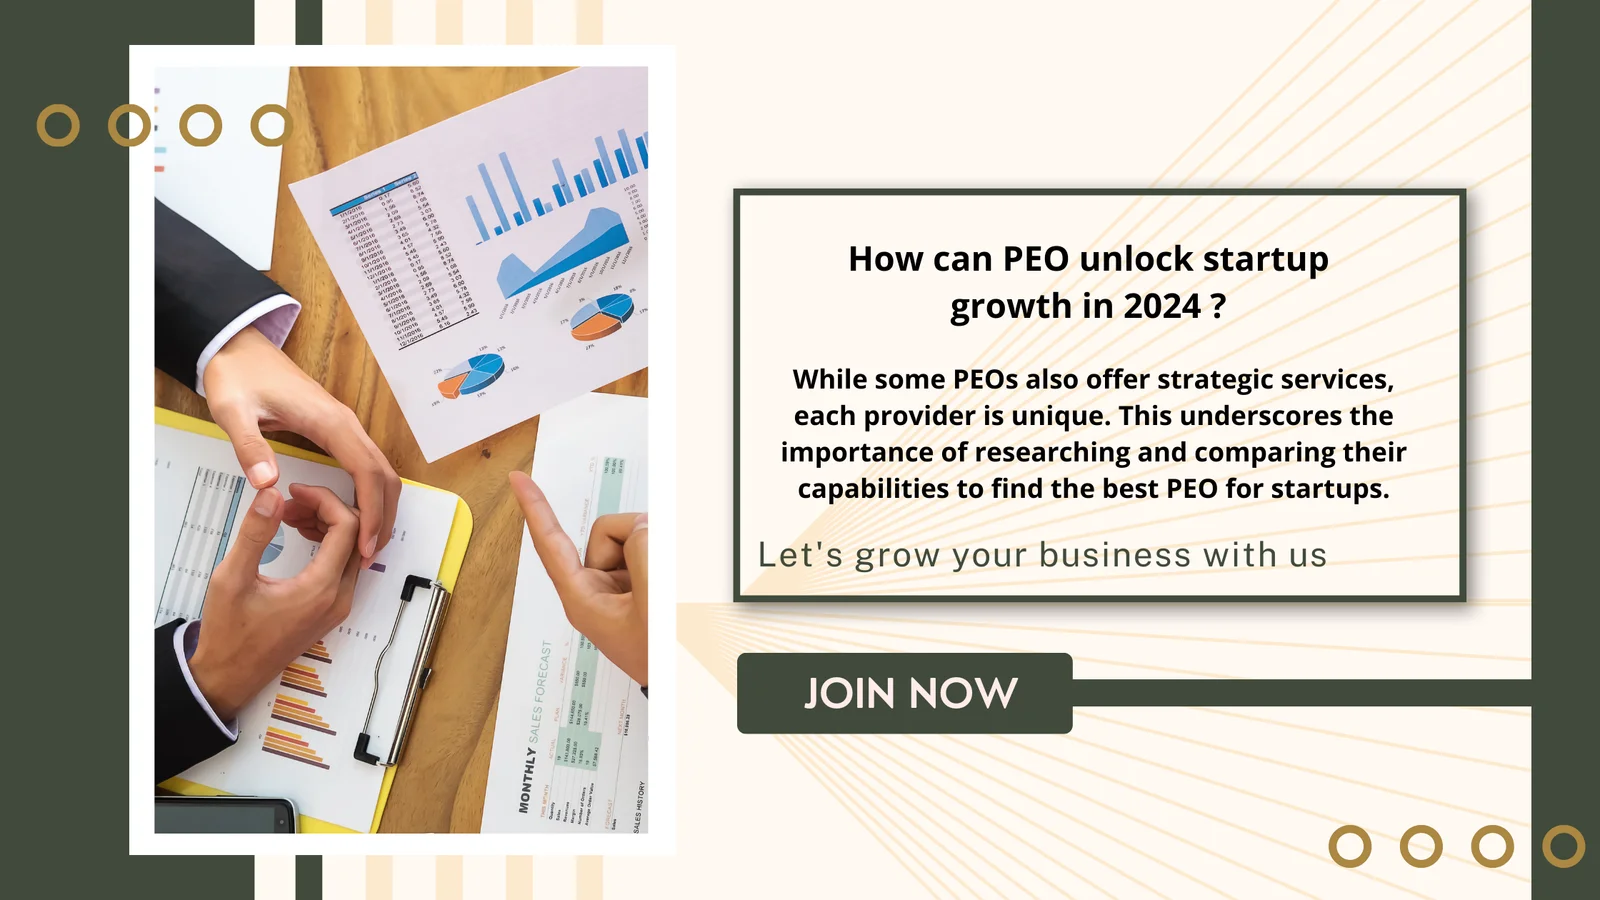 PEO unlock startup growth in 2024